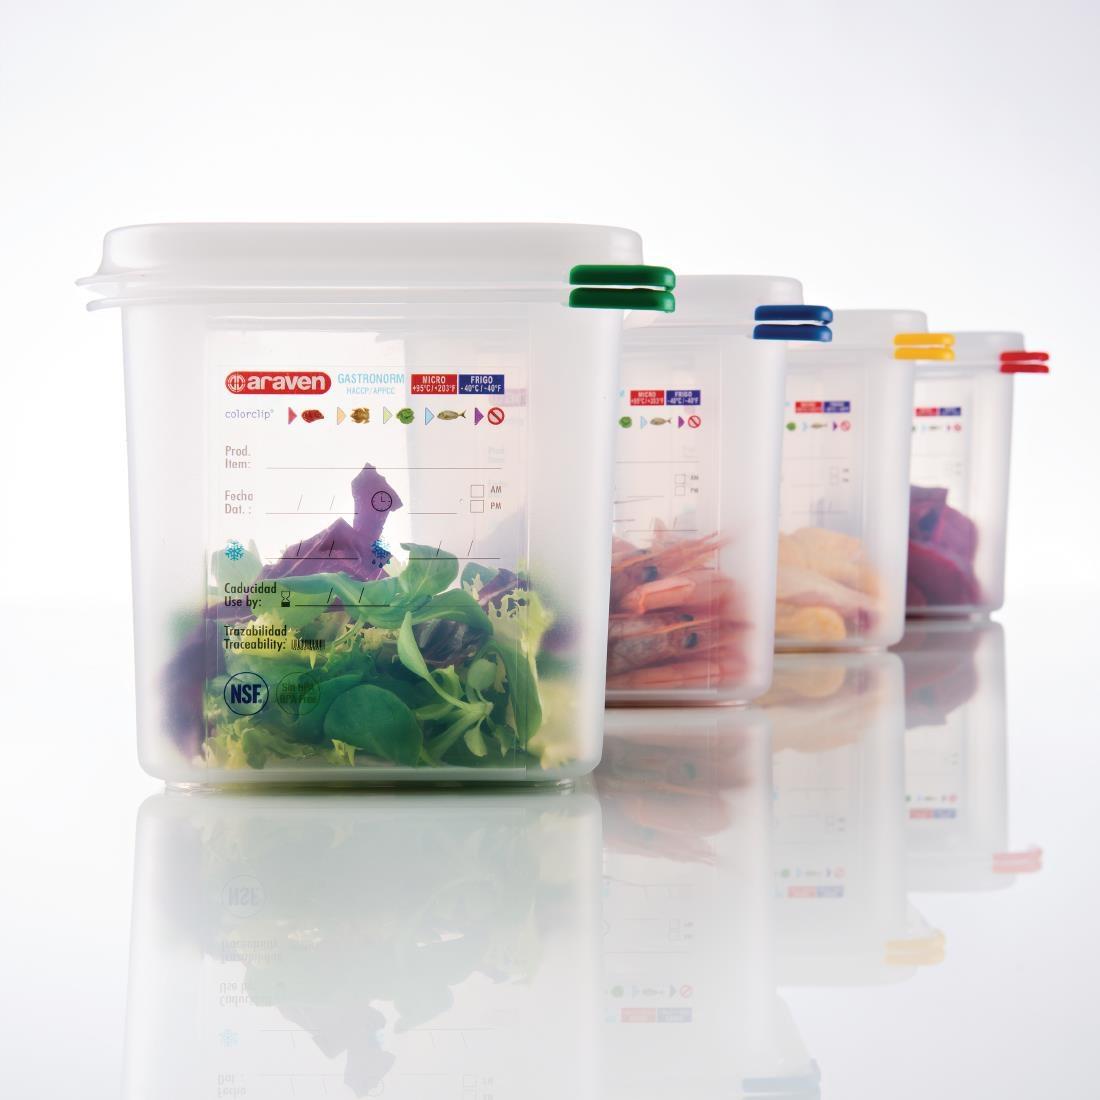 Araven Polypropylene 1/6 Gastronorm Food Containers 2.6Ltr (Pack of 4) - T984  - 5